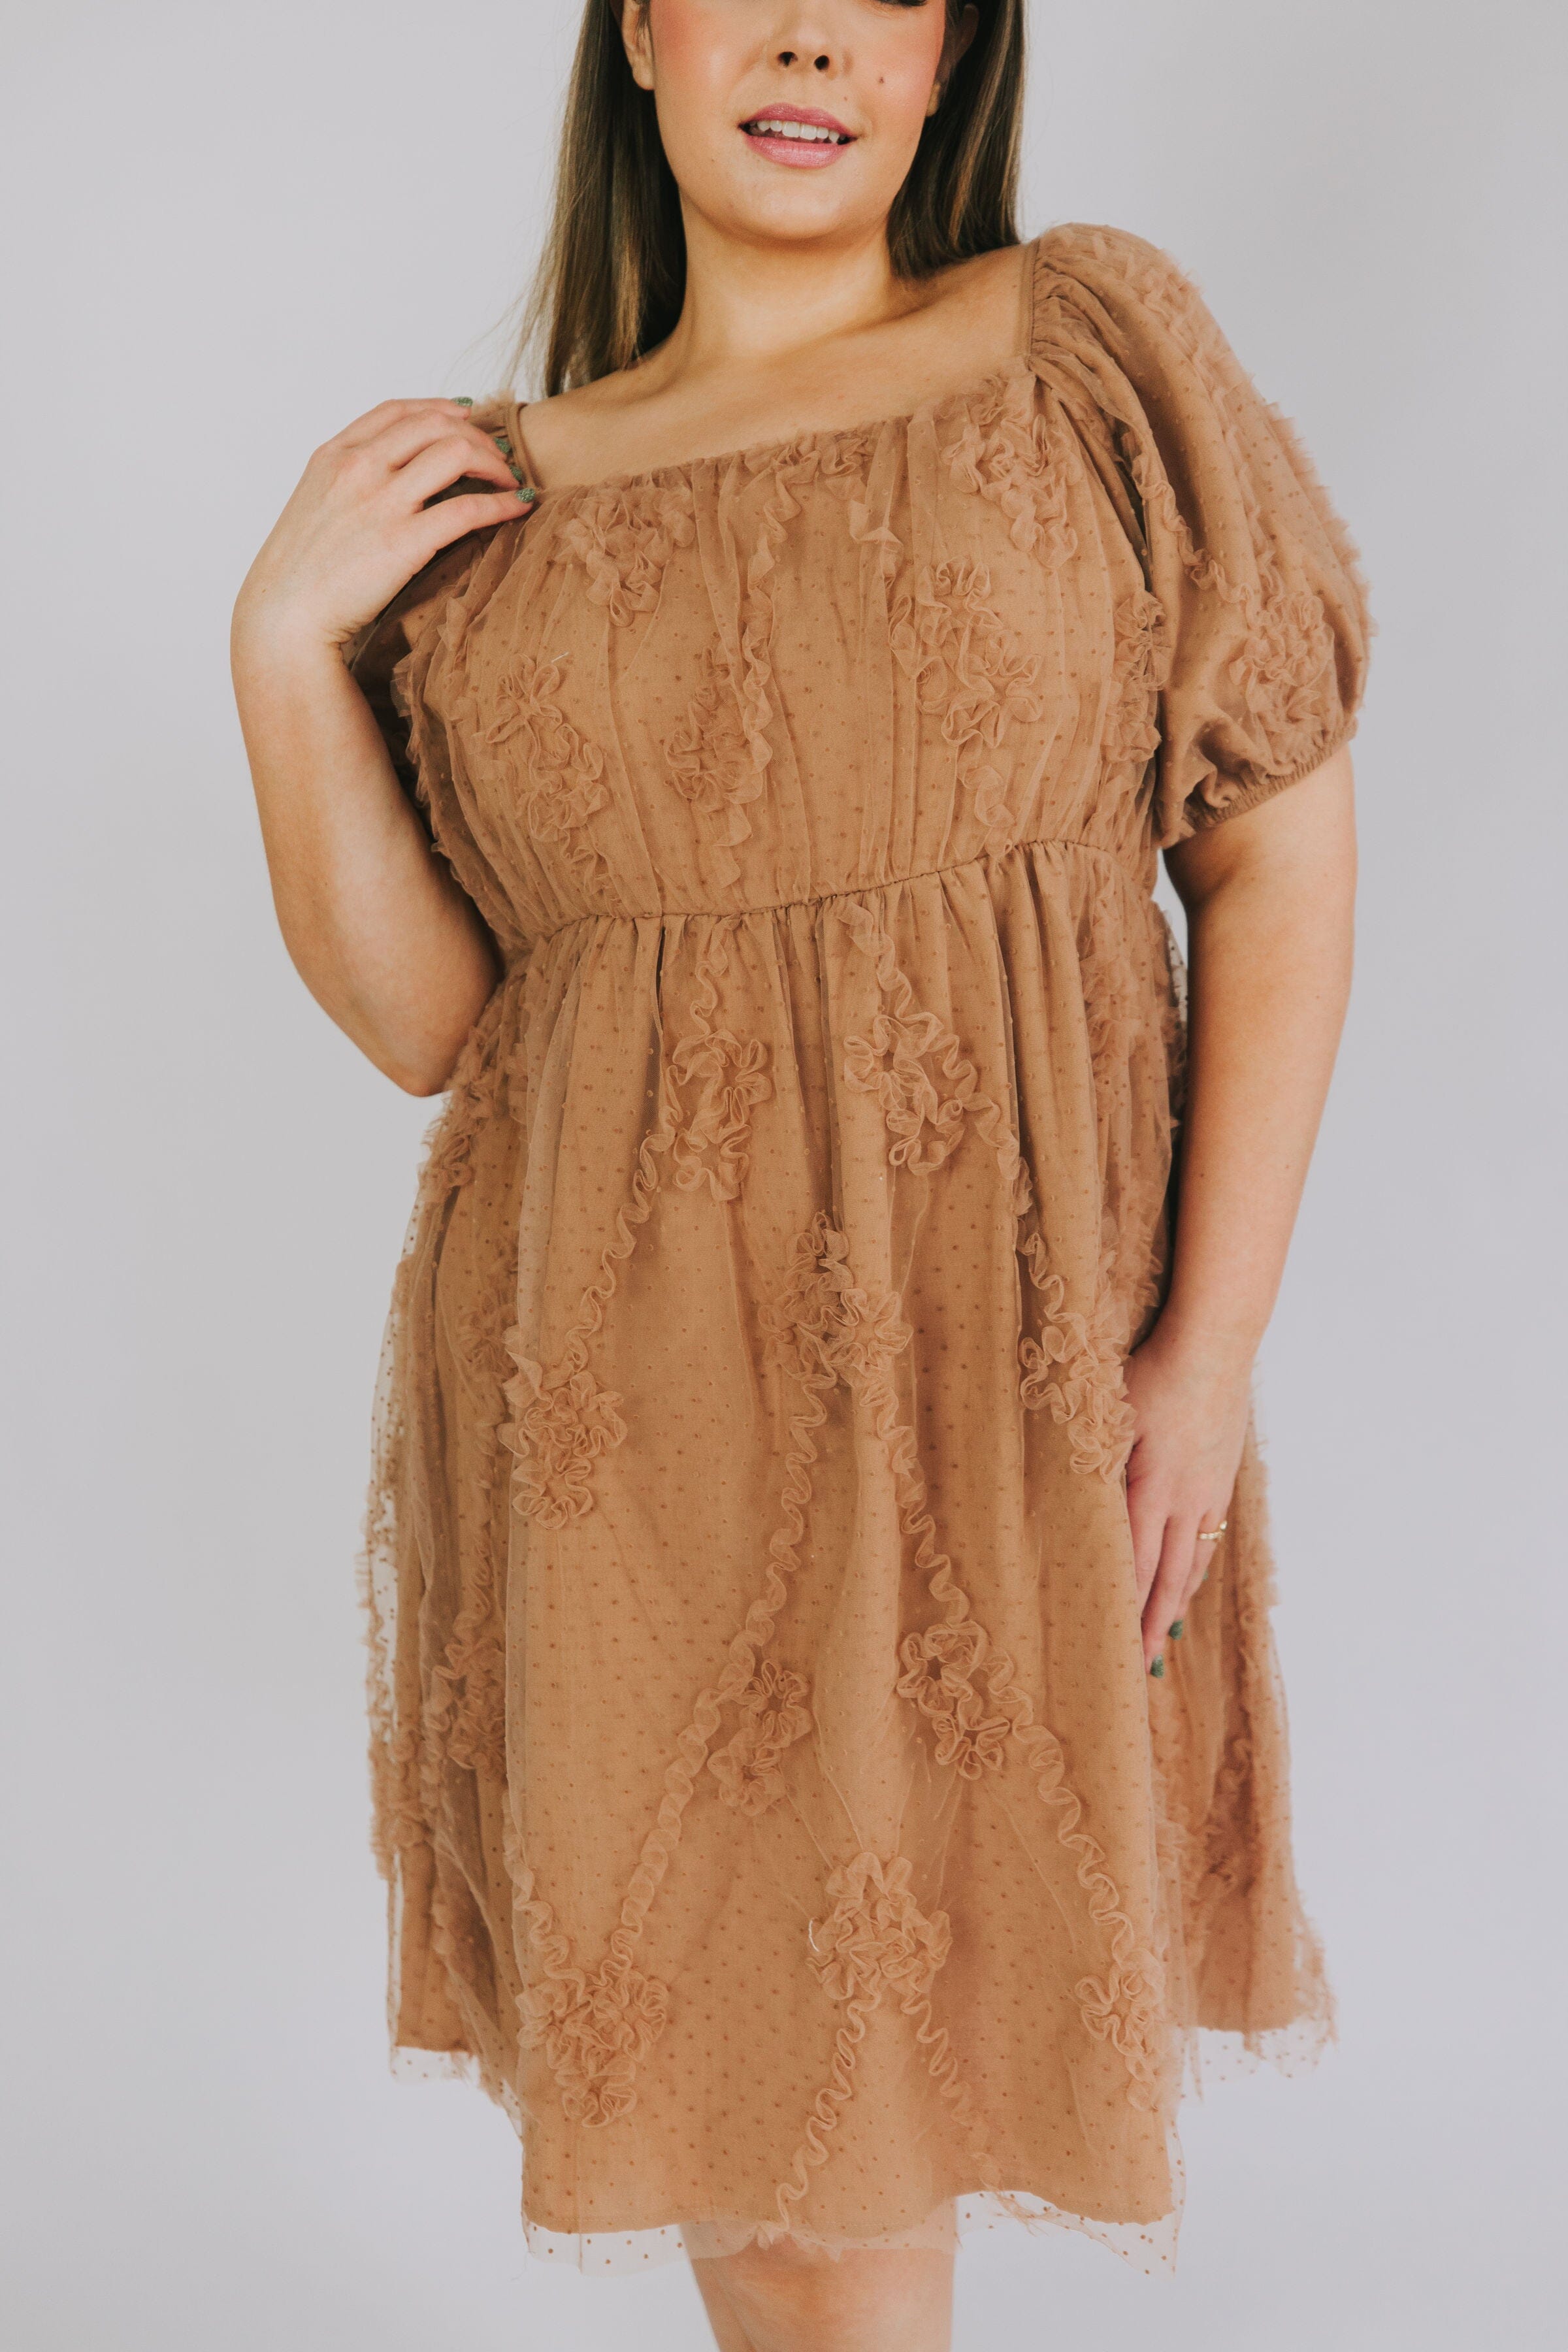 PLUS SIZE - Hall of Fame Dress